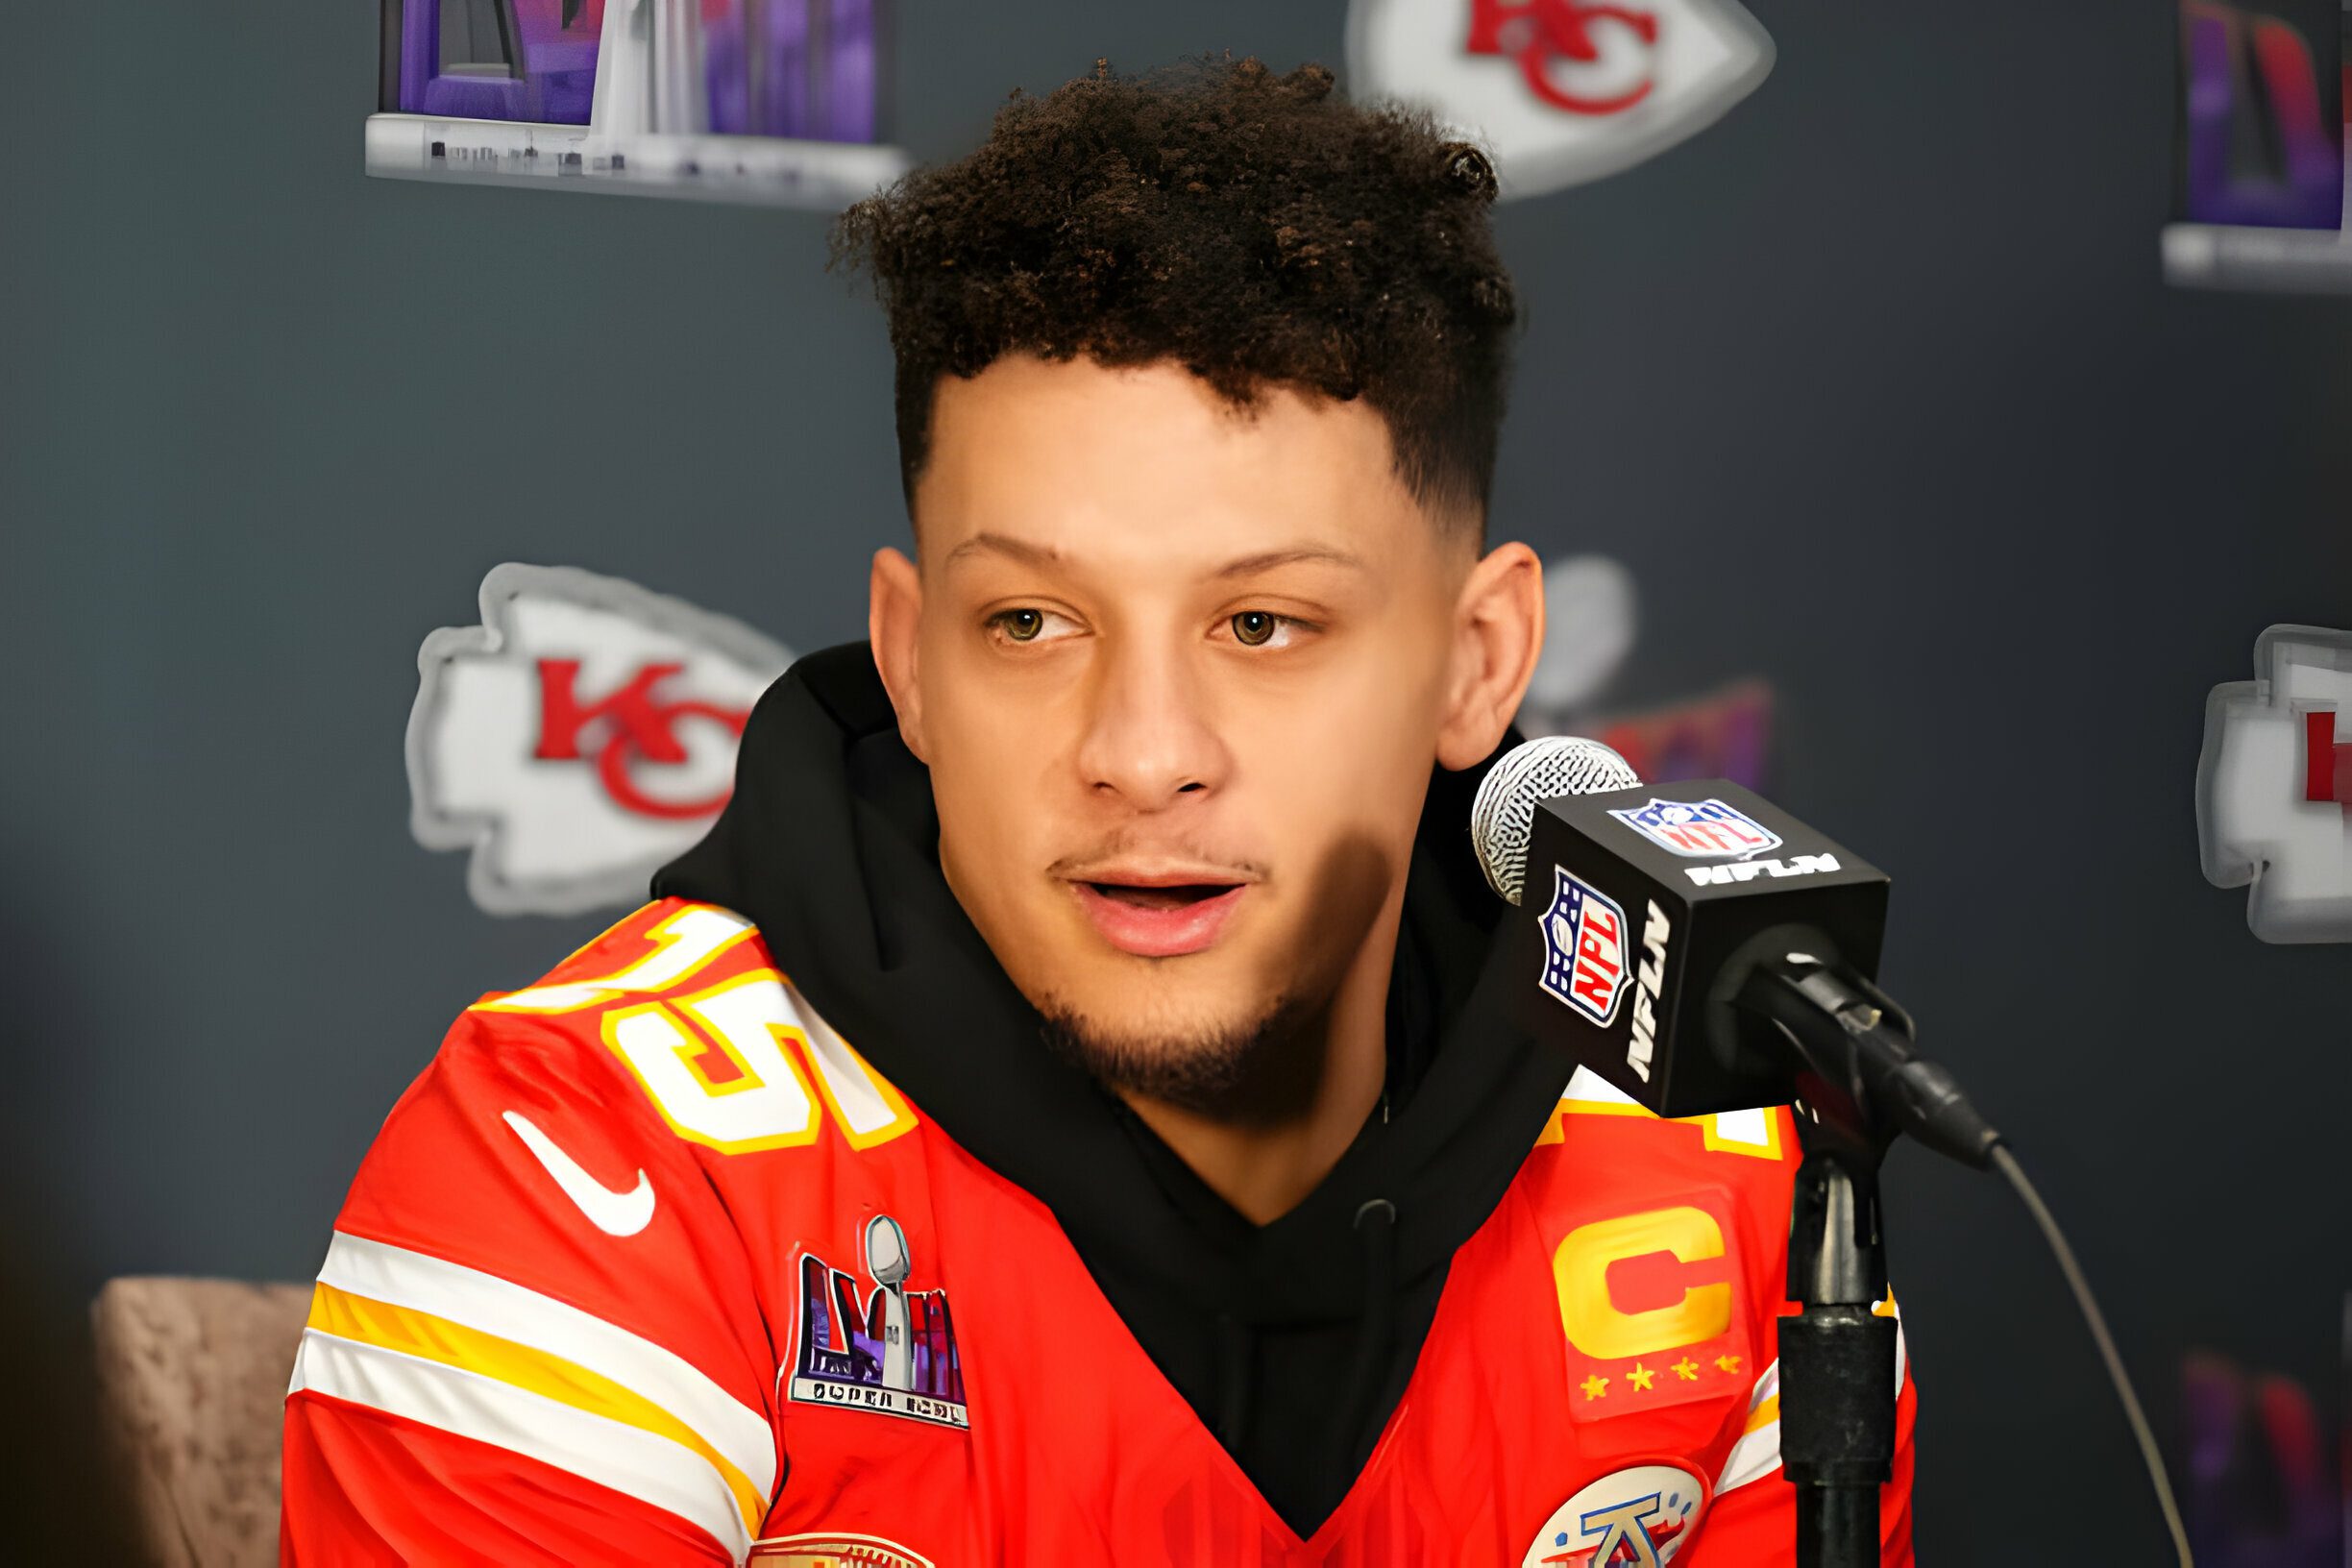 HENDERSON, NEVADA - FEBRUARY 06: Patrick Mahomes of the Kansas City Chiefs speaks to the media during Kansas City Chiefs media availability ahead of Super Bowl LVIII at Westin Lake Las Vegas Resort and Spa on February 06, 2024 in Henderson, Nevada. (Photo by Chris Unger/Getty Images)